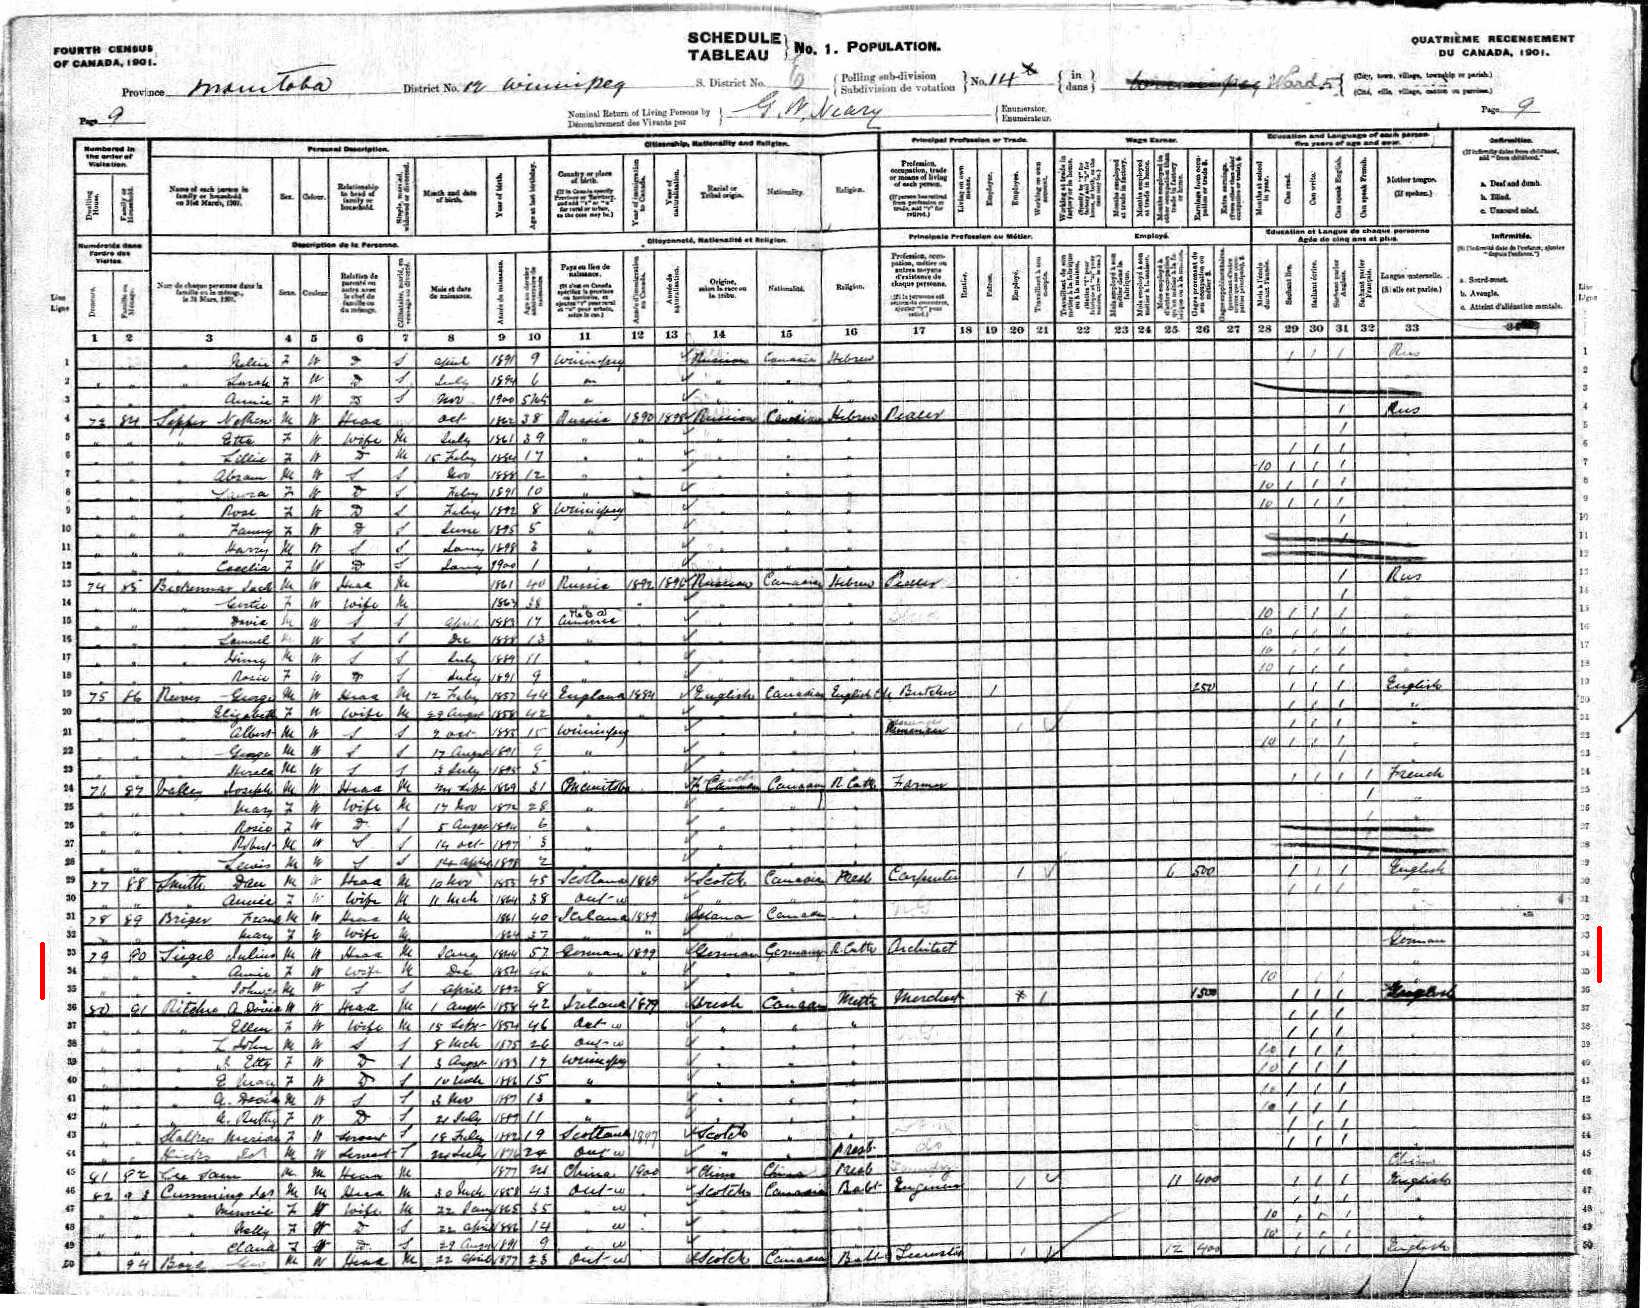 A ledger from the 1901 census in Winnipeg.